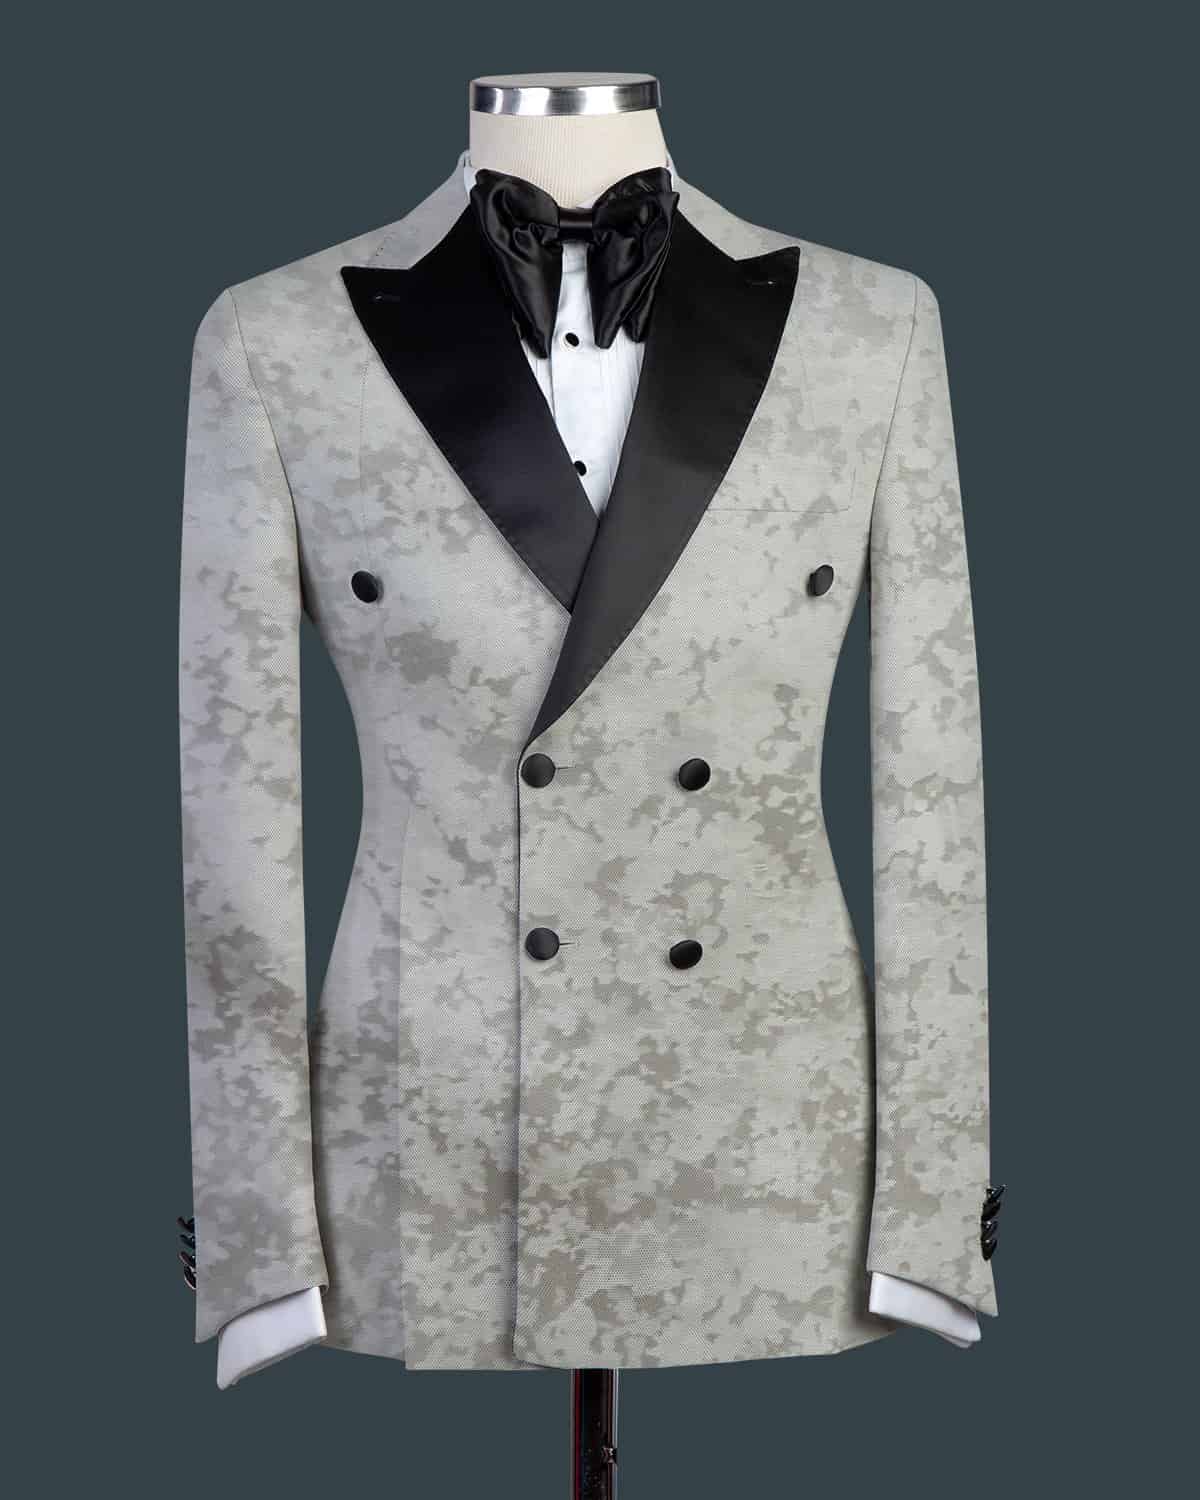 Demarquez-vous White and Cream 2 Pieces Double Breasted Tuxedo ...